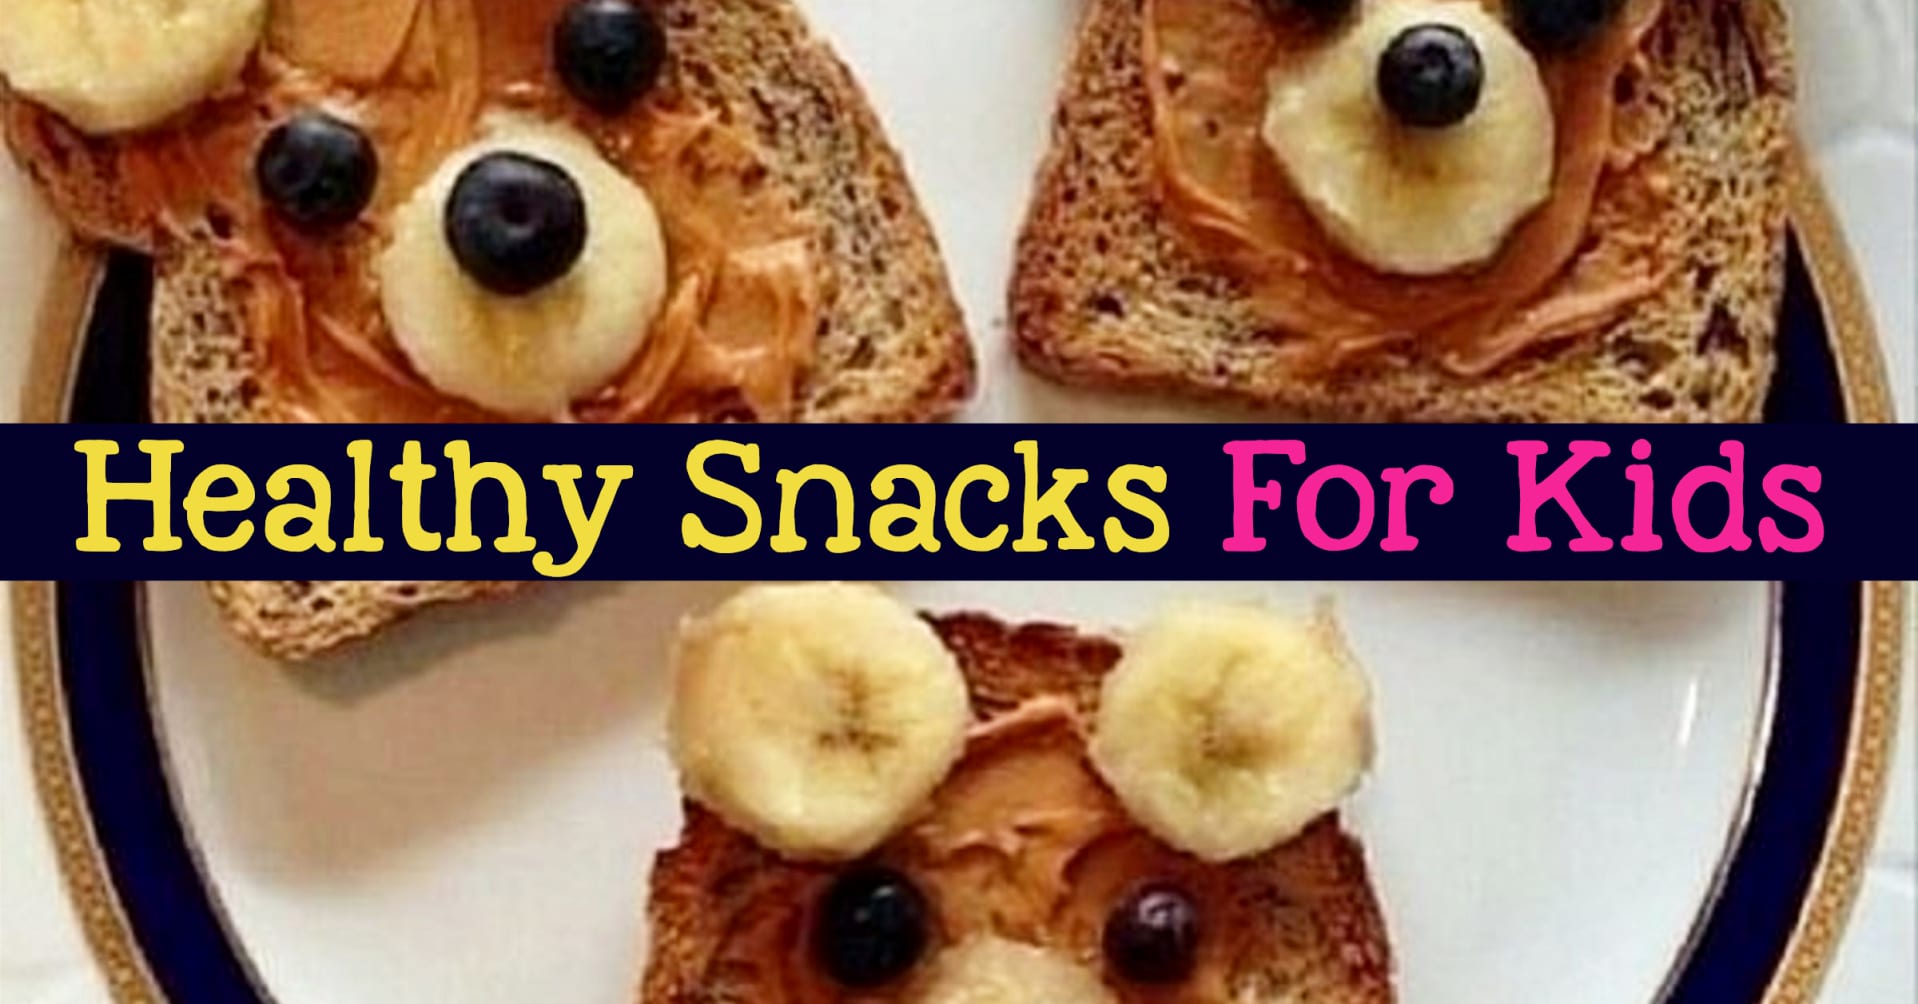 Healthy Snacks for Kids - quick healthy snacks for kids on the go, for kids to make and healthy snacks for kids lunch boxes at school - easy and fun healthy snacks for toddlers and preschoolers - fun school snacks for kids too!